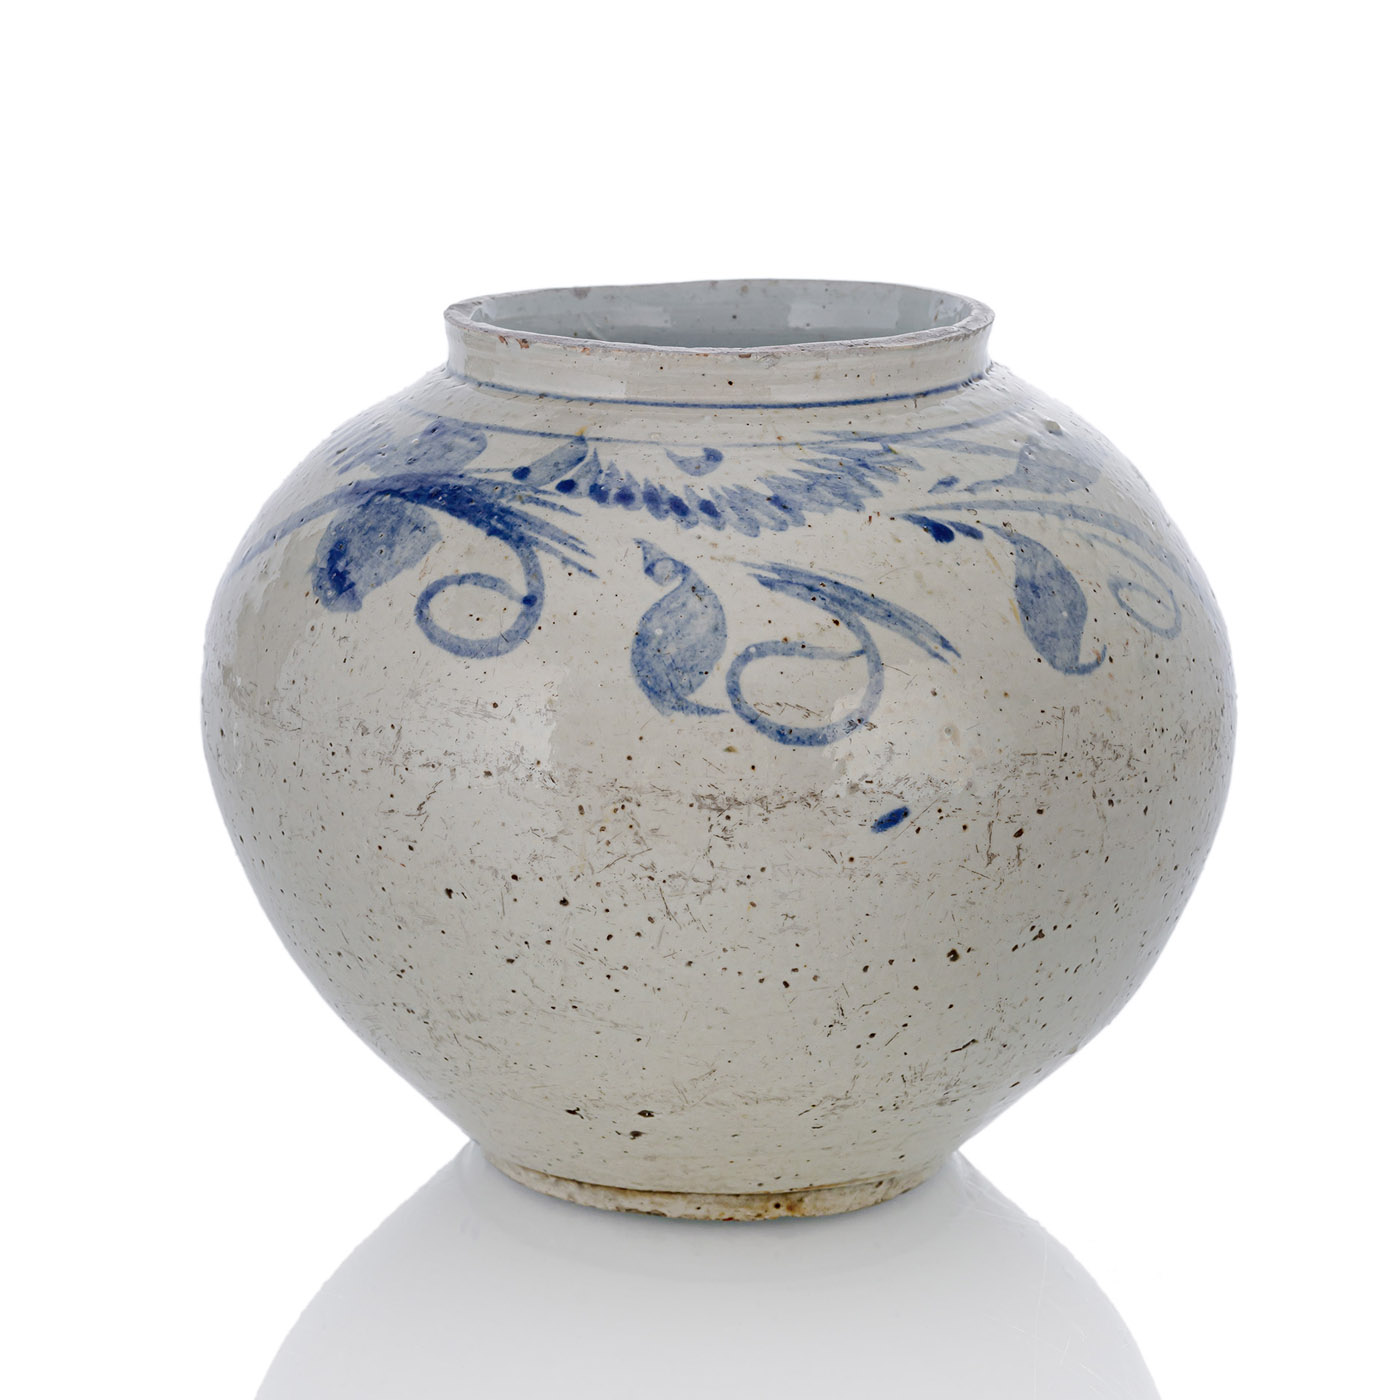 <b>A BLUE AND WHITE JAR WITH BLOSSOMS AND SCROLLWORK</b>